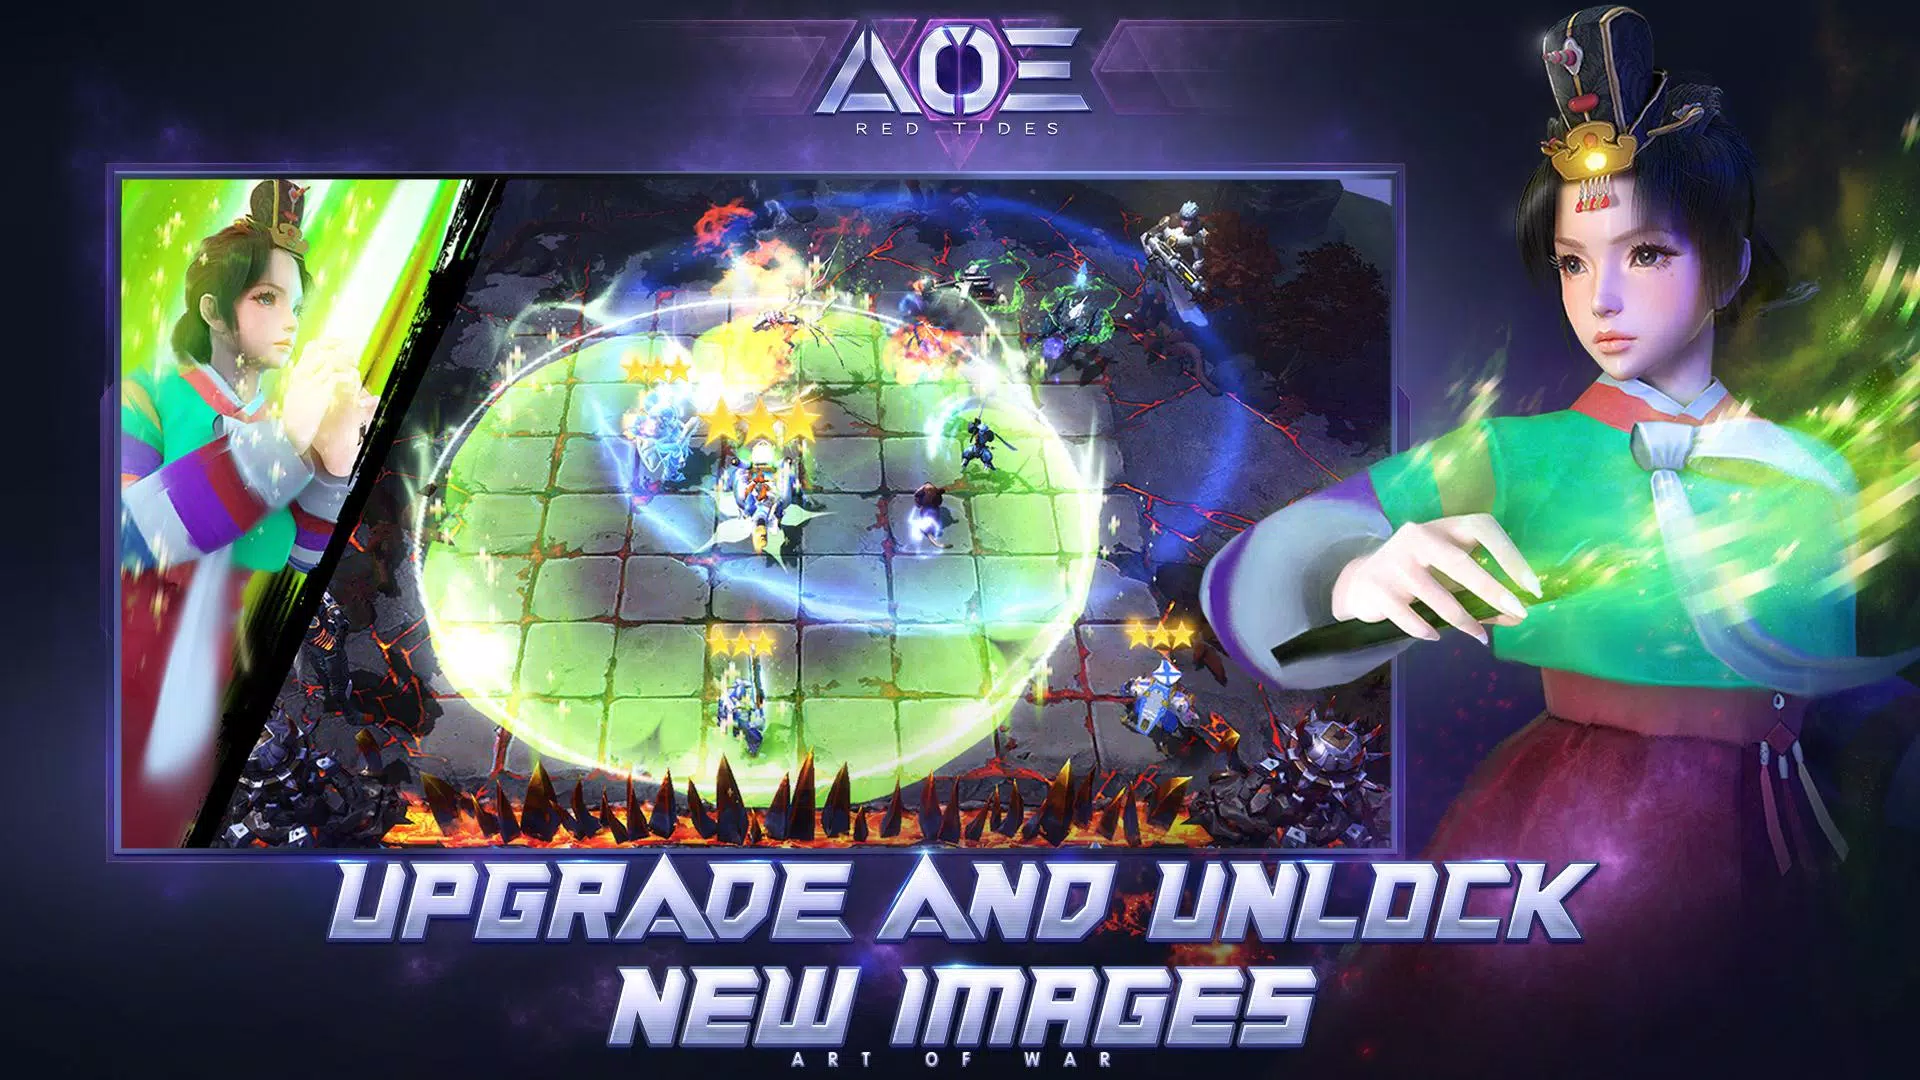 Arena of Evolution: Red Tides for Android - APK Download